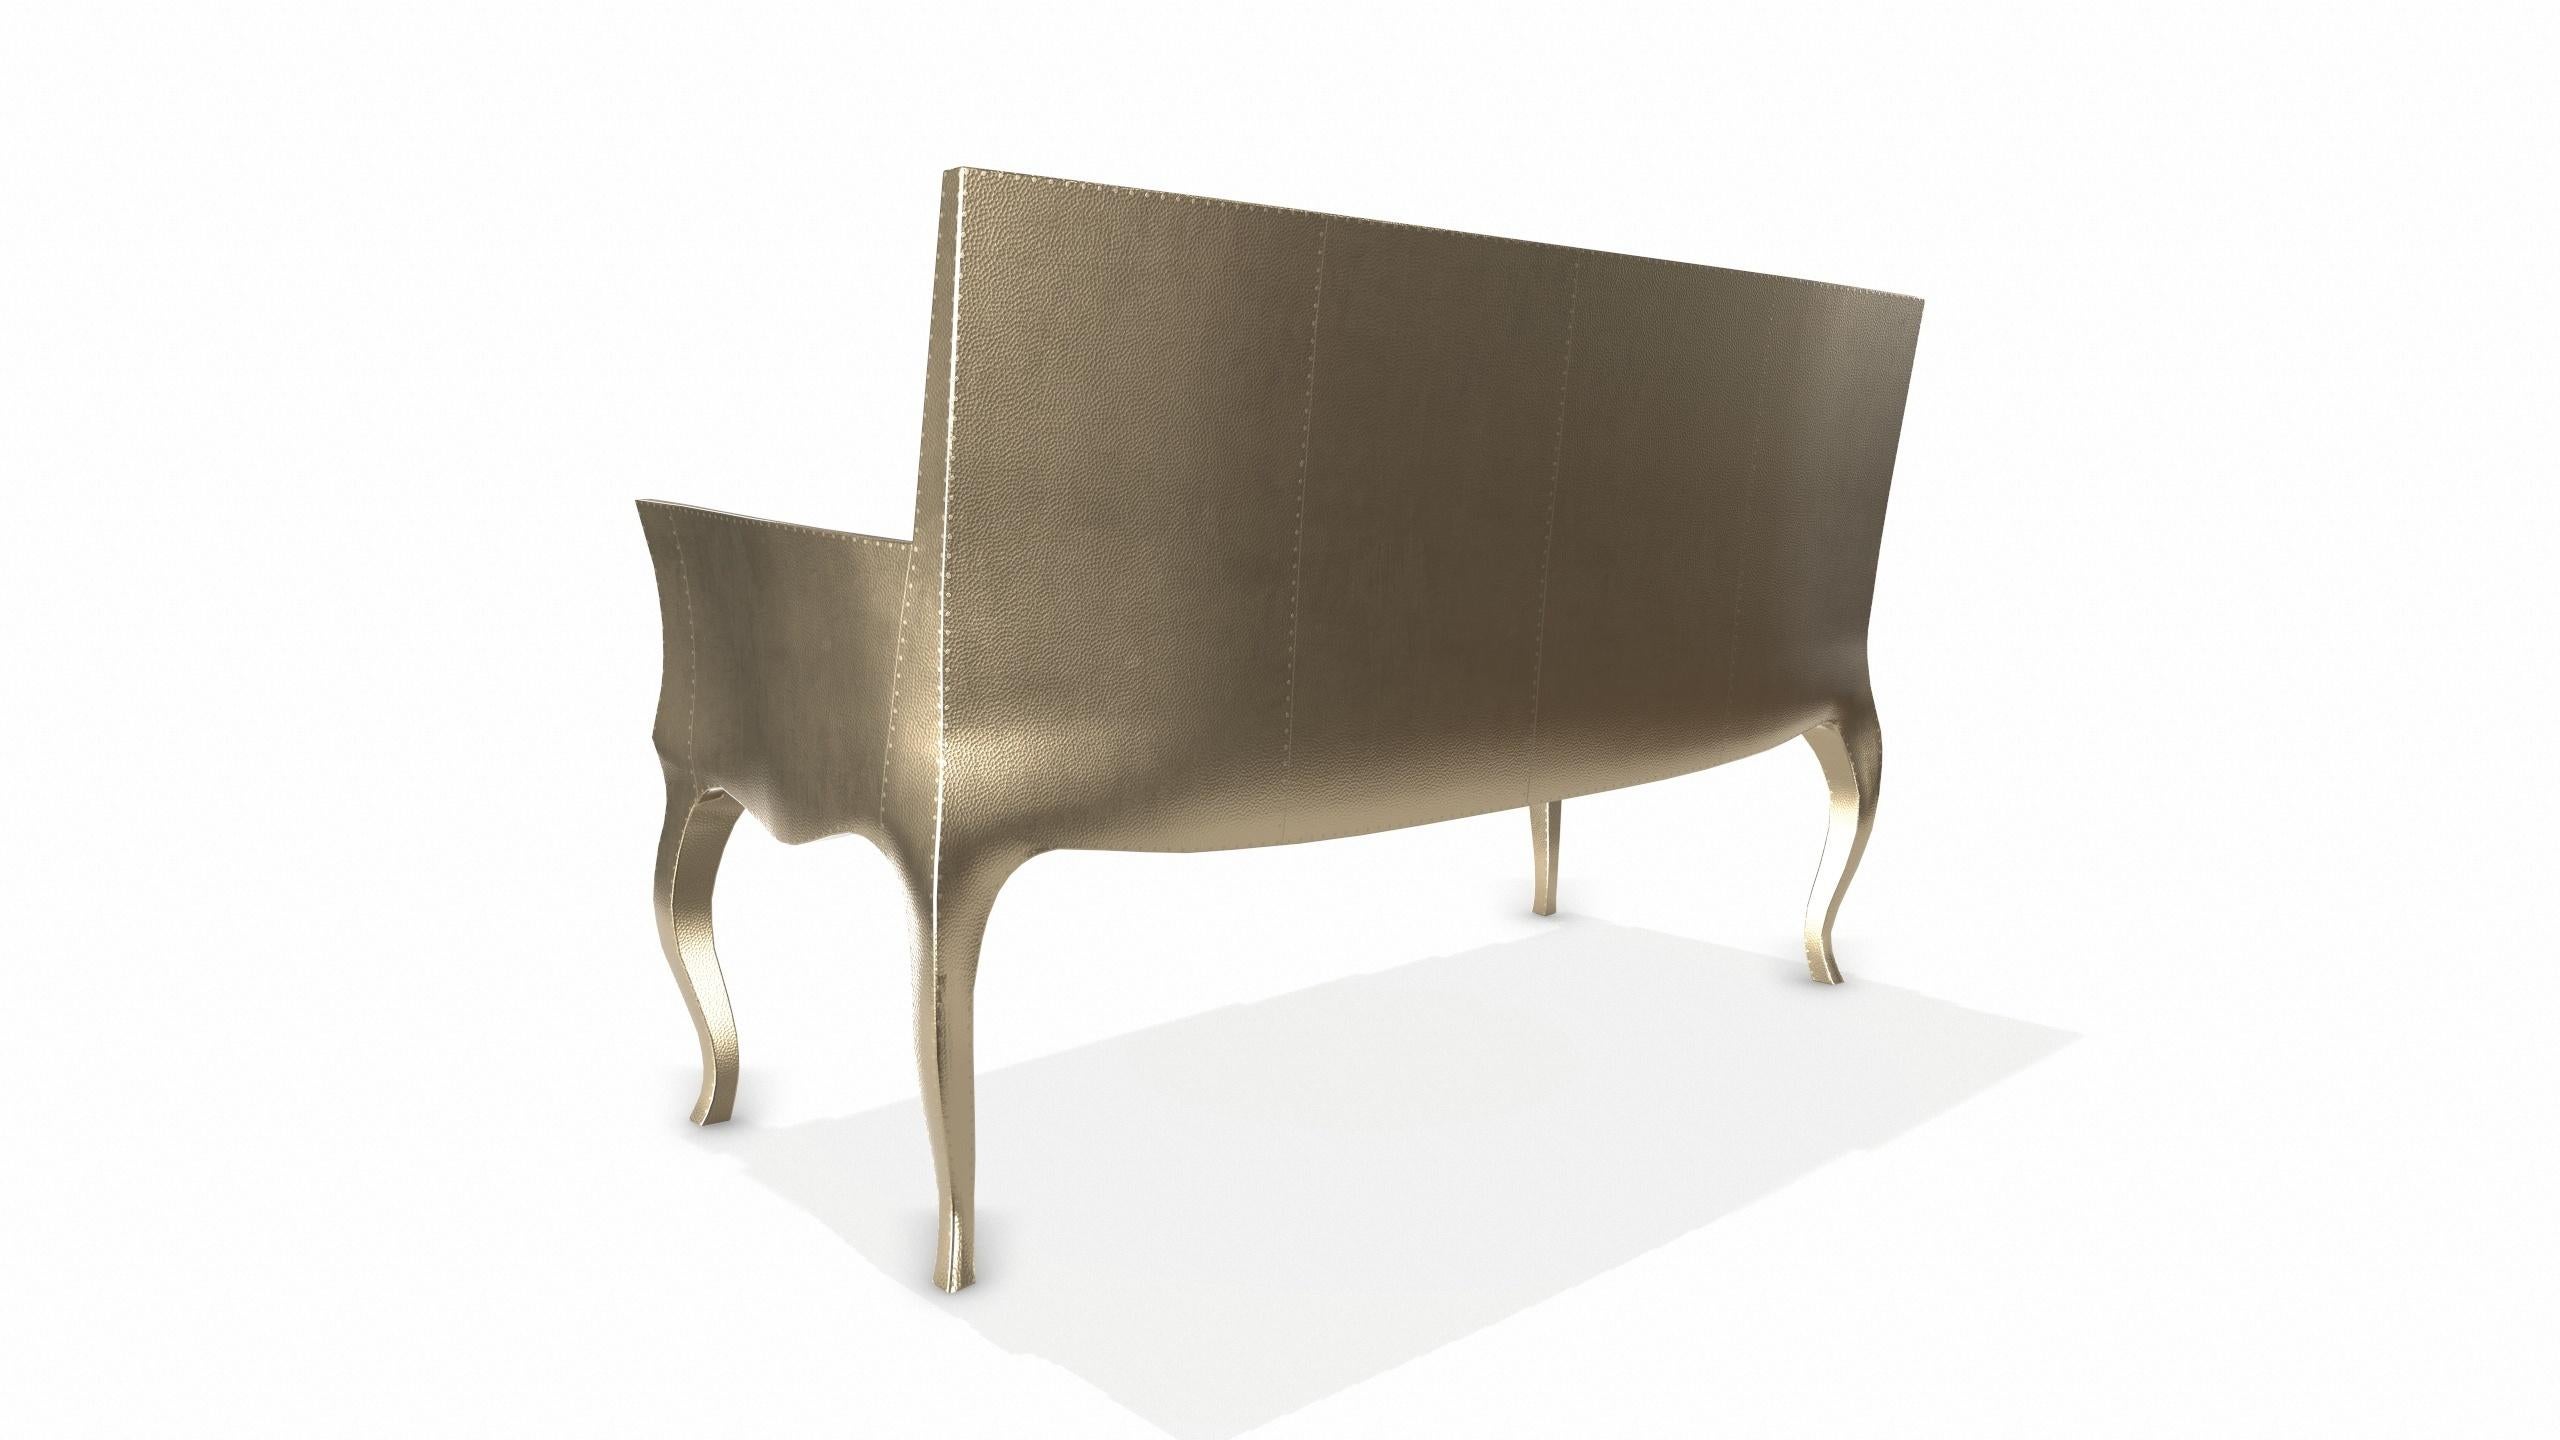 Louise Settee Art Deco Daybeds in Mid. Hammered Brass by Paul Mathieu For Sale 1